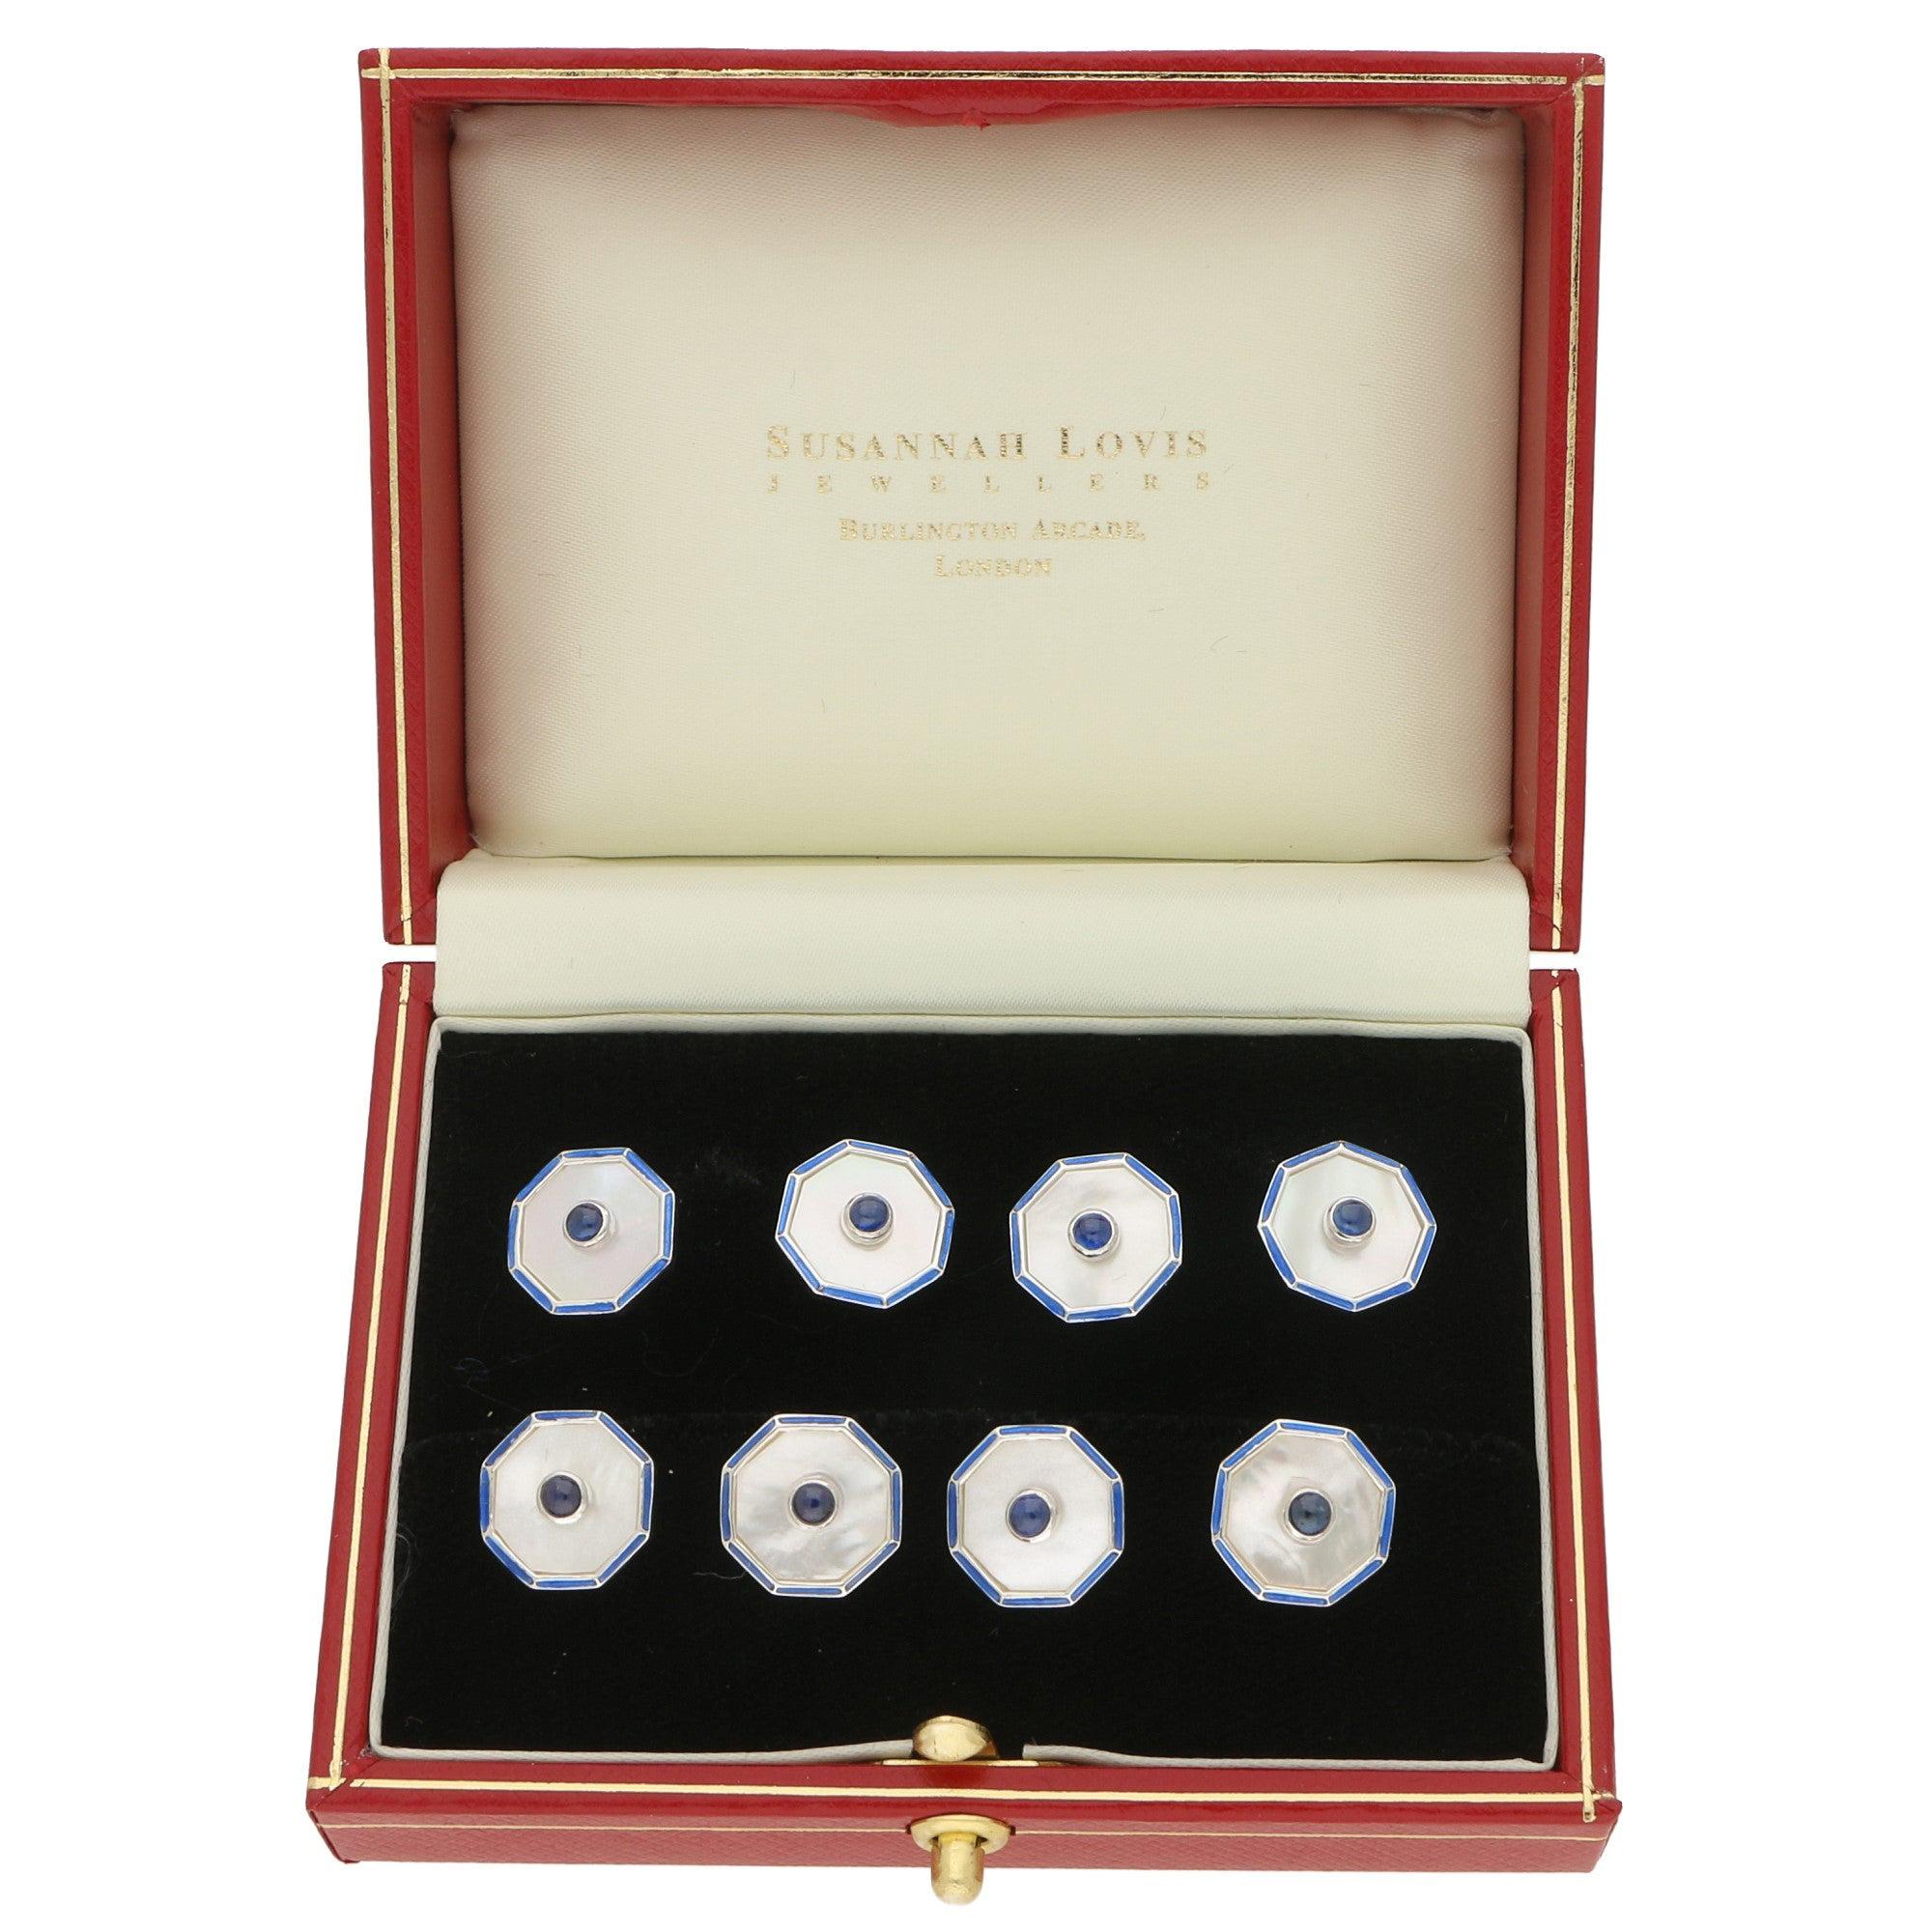 Mother of Pearl, Sapphire and Enamel Cufflink and Shirt Stud in Solid Silver